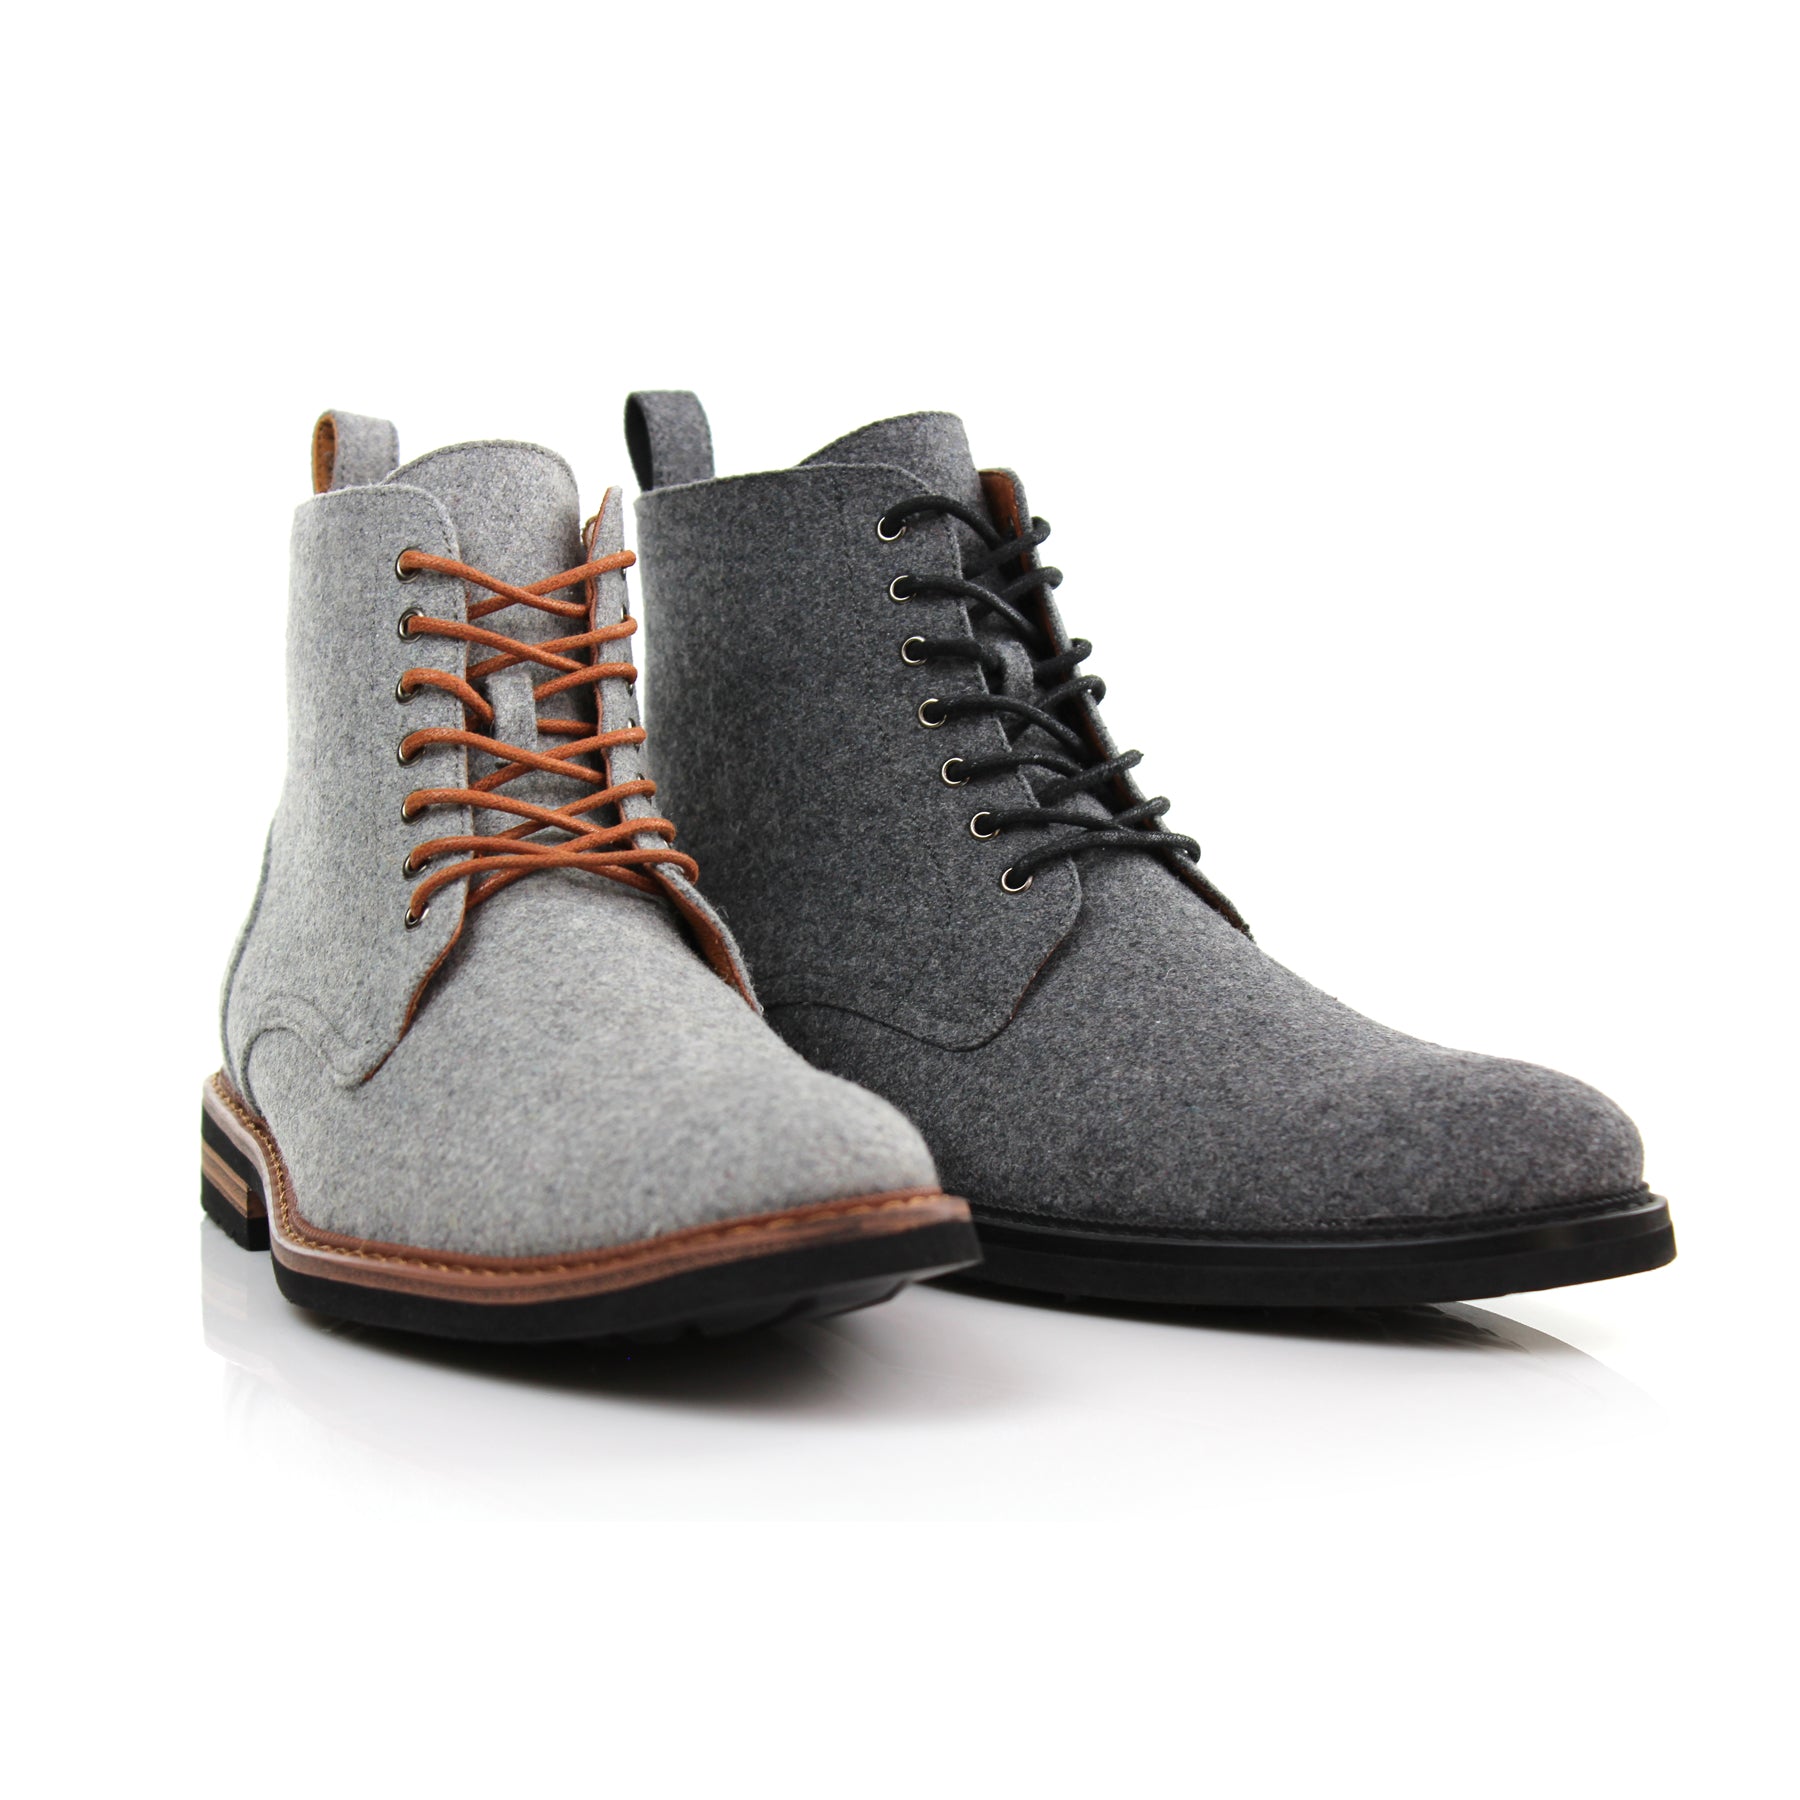 Woolen Ankle Boots | Duke by Polar Fox | Conal Footwear | Group Angle View